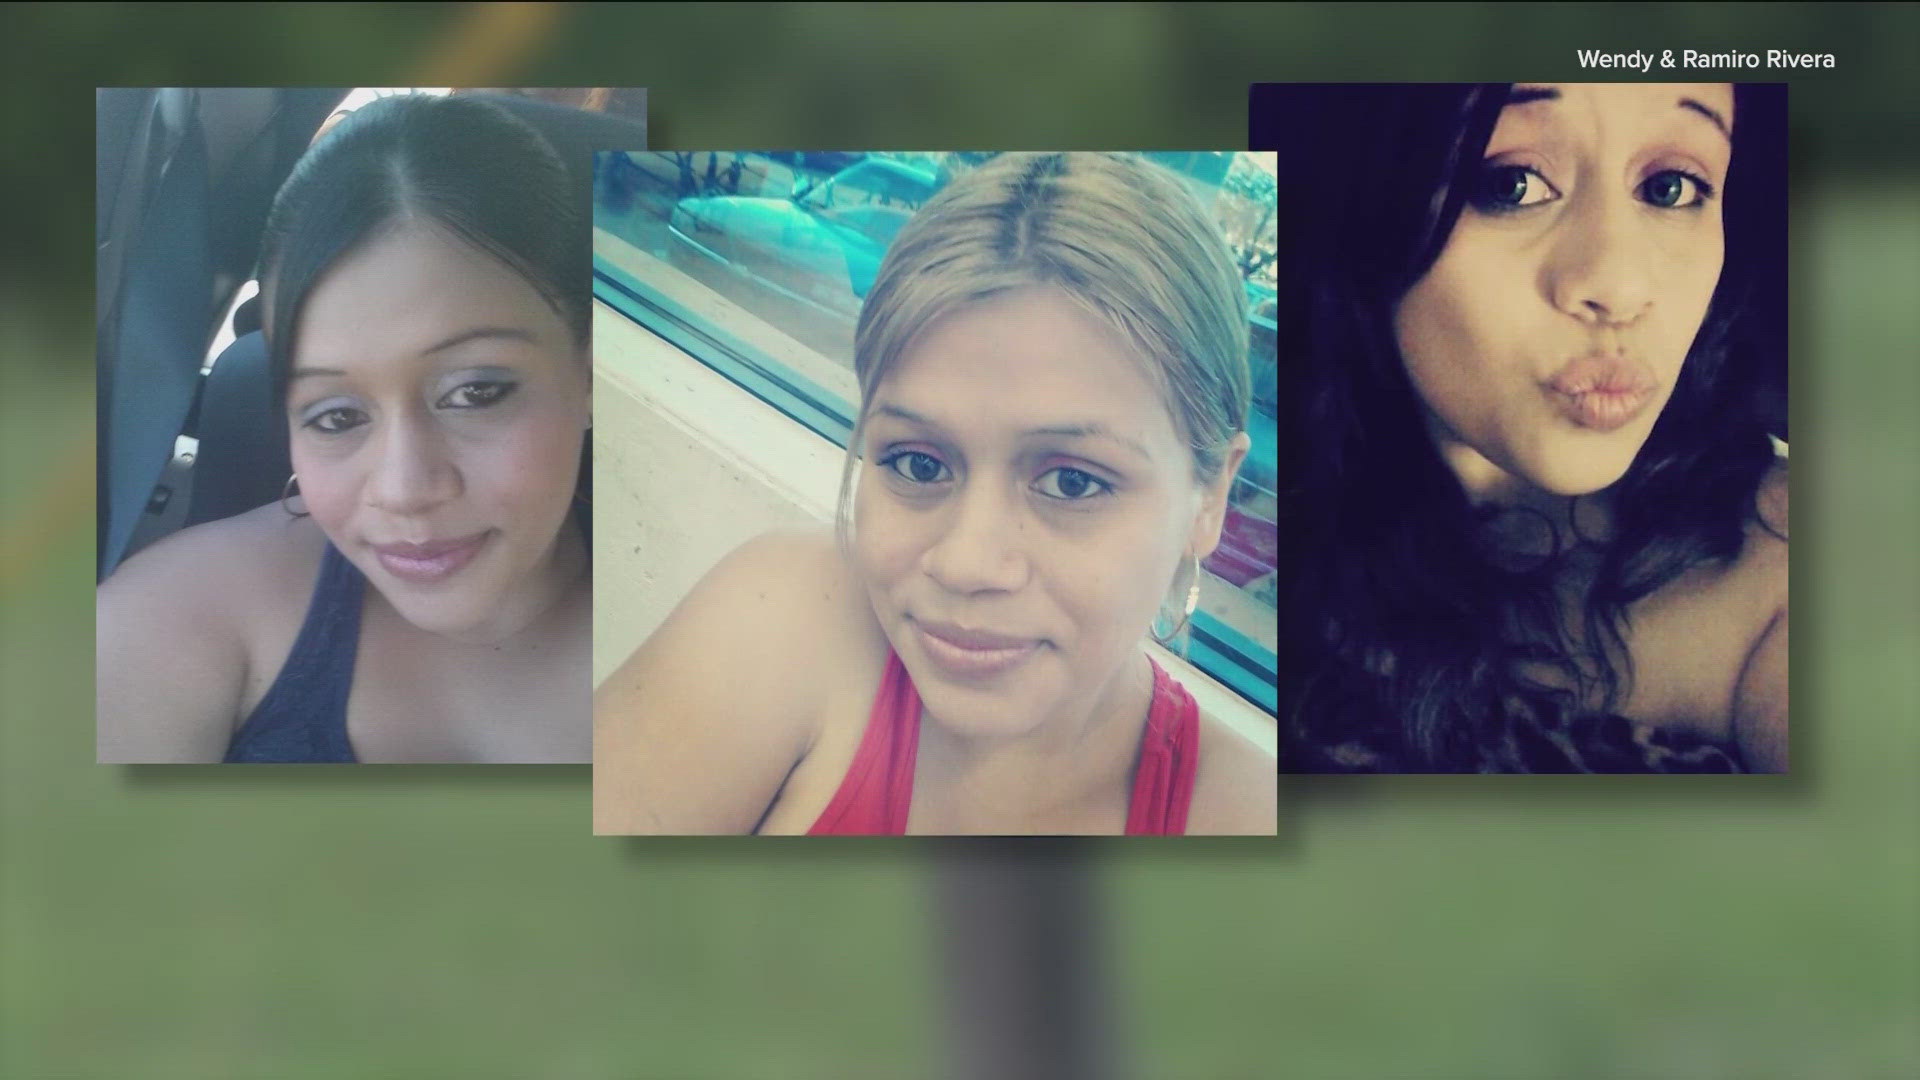 Police believe 35-year-old Alyssa Rivera was killed at an abandoned house by an unknown person.